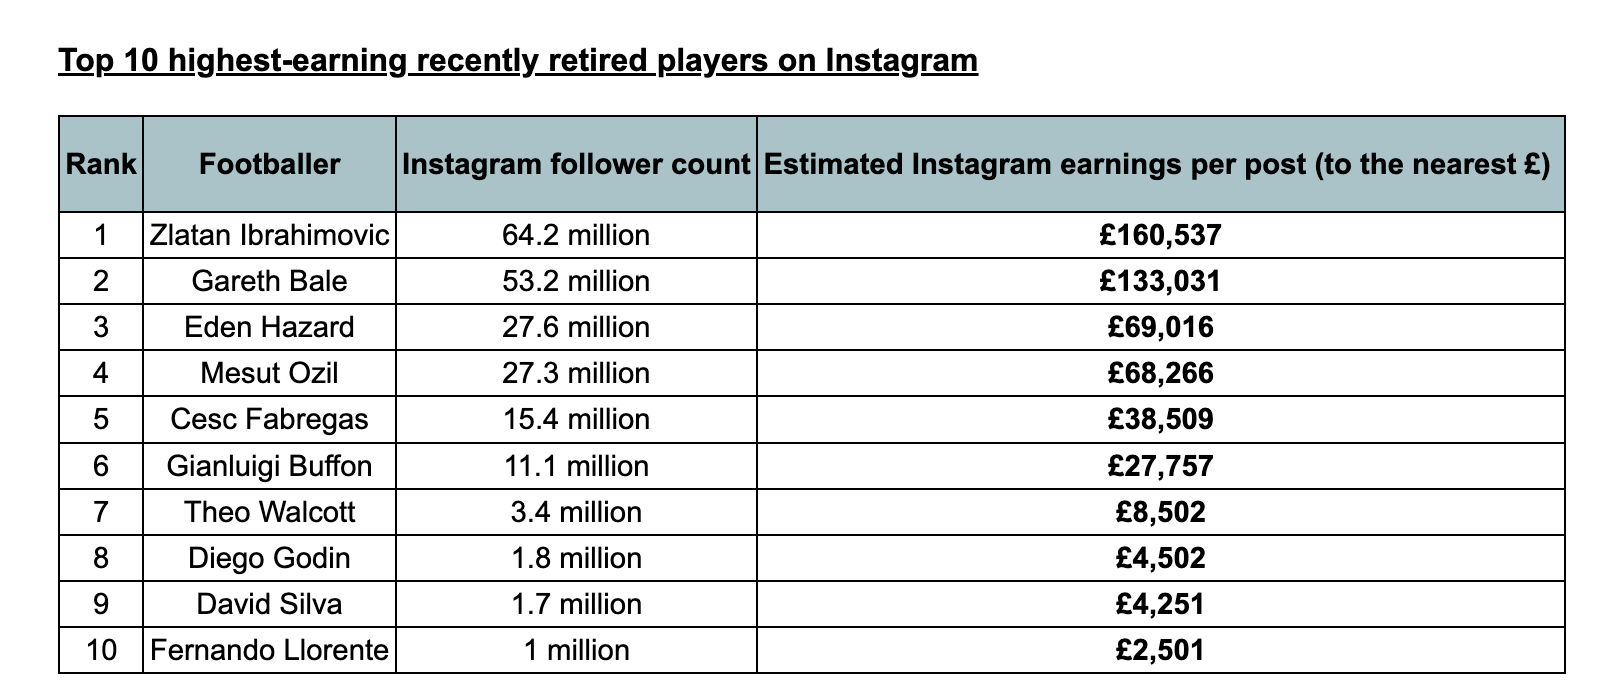 Top_10_highest-earning_recently_retired_players_on_Instagram.png